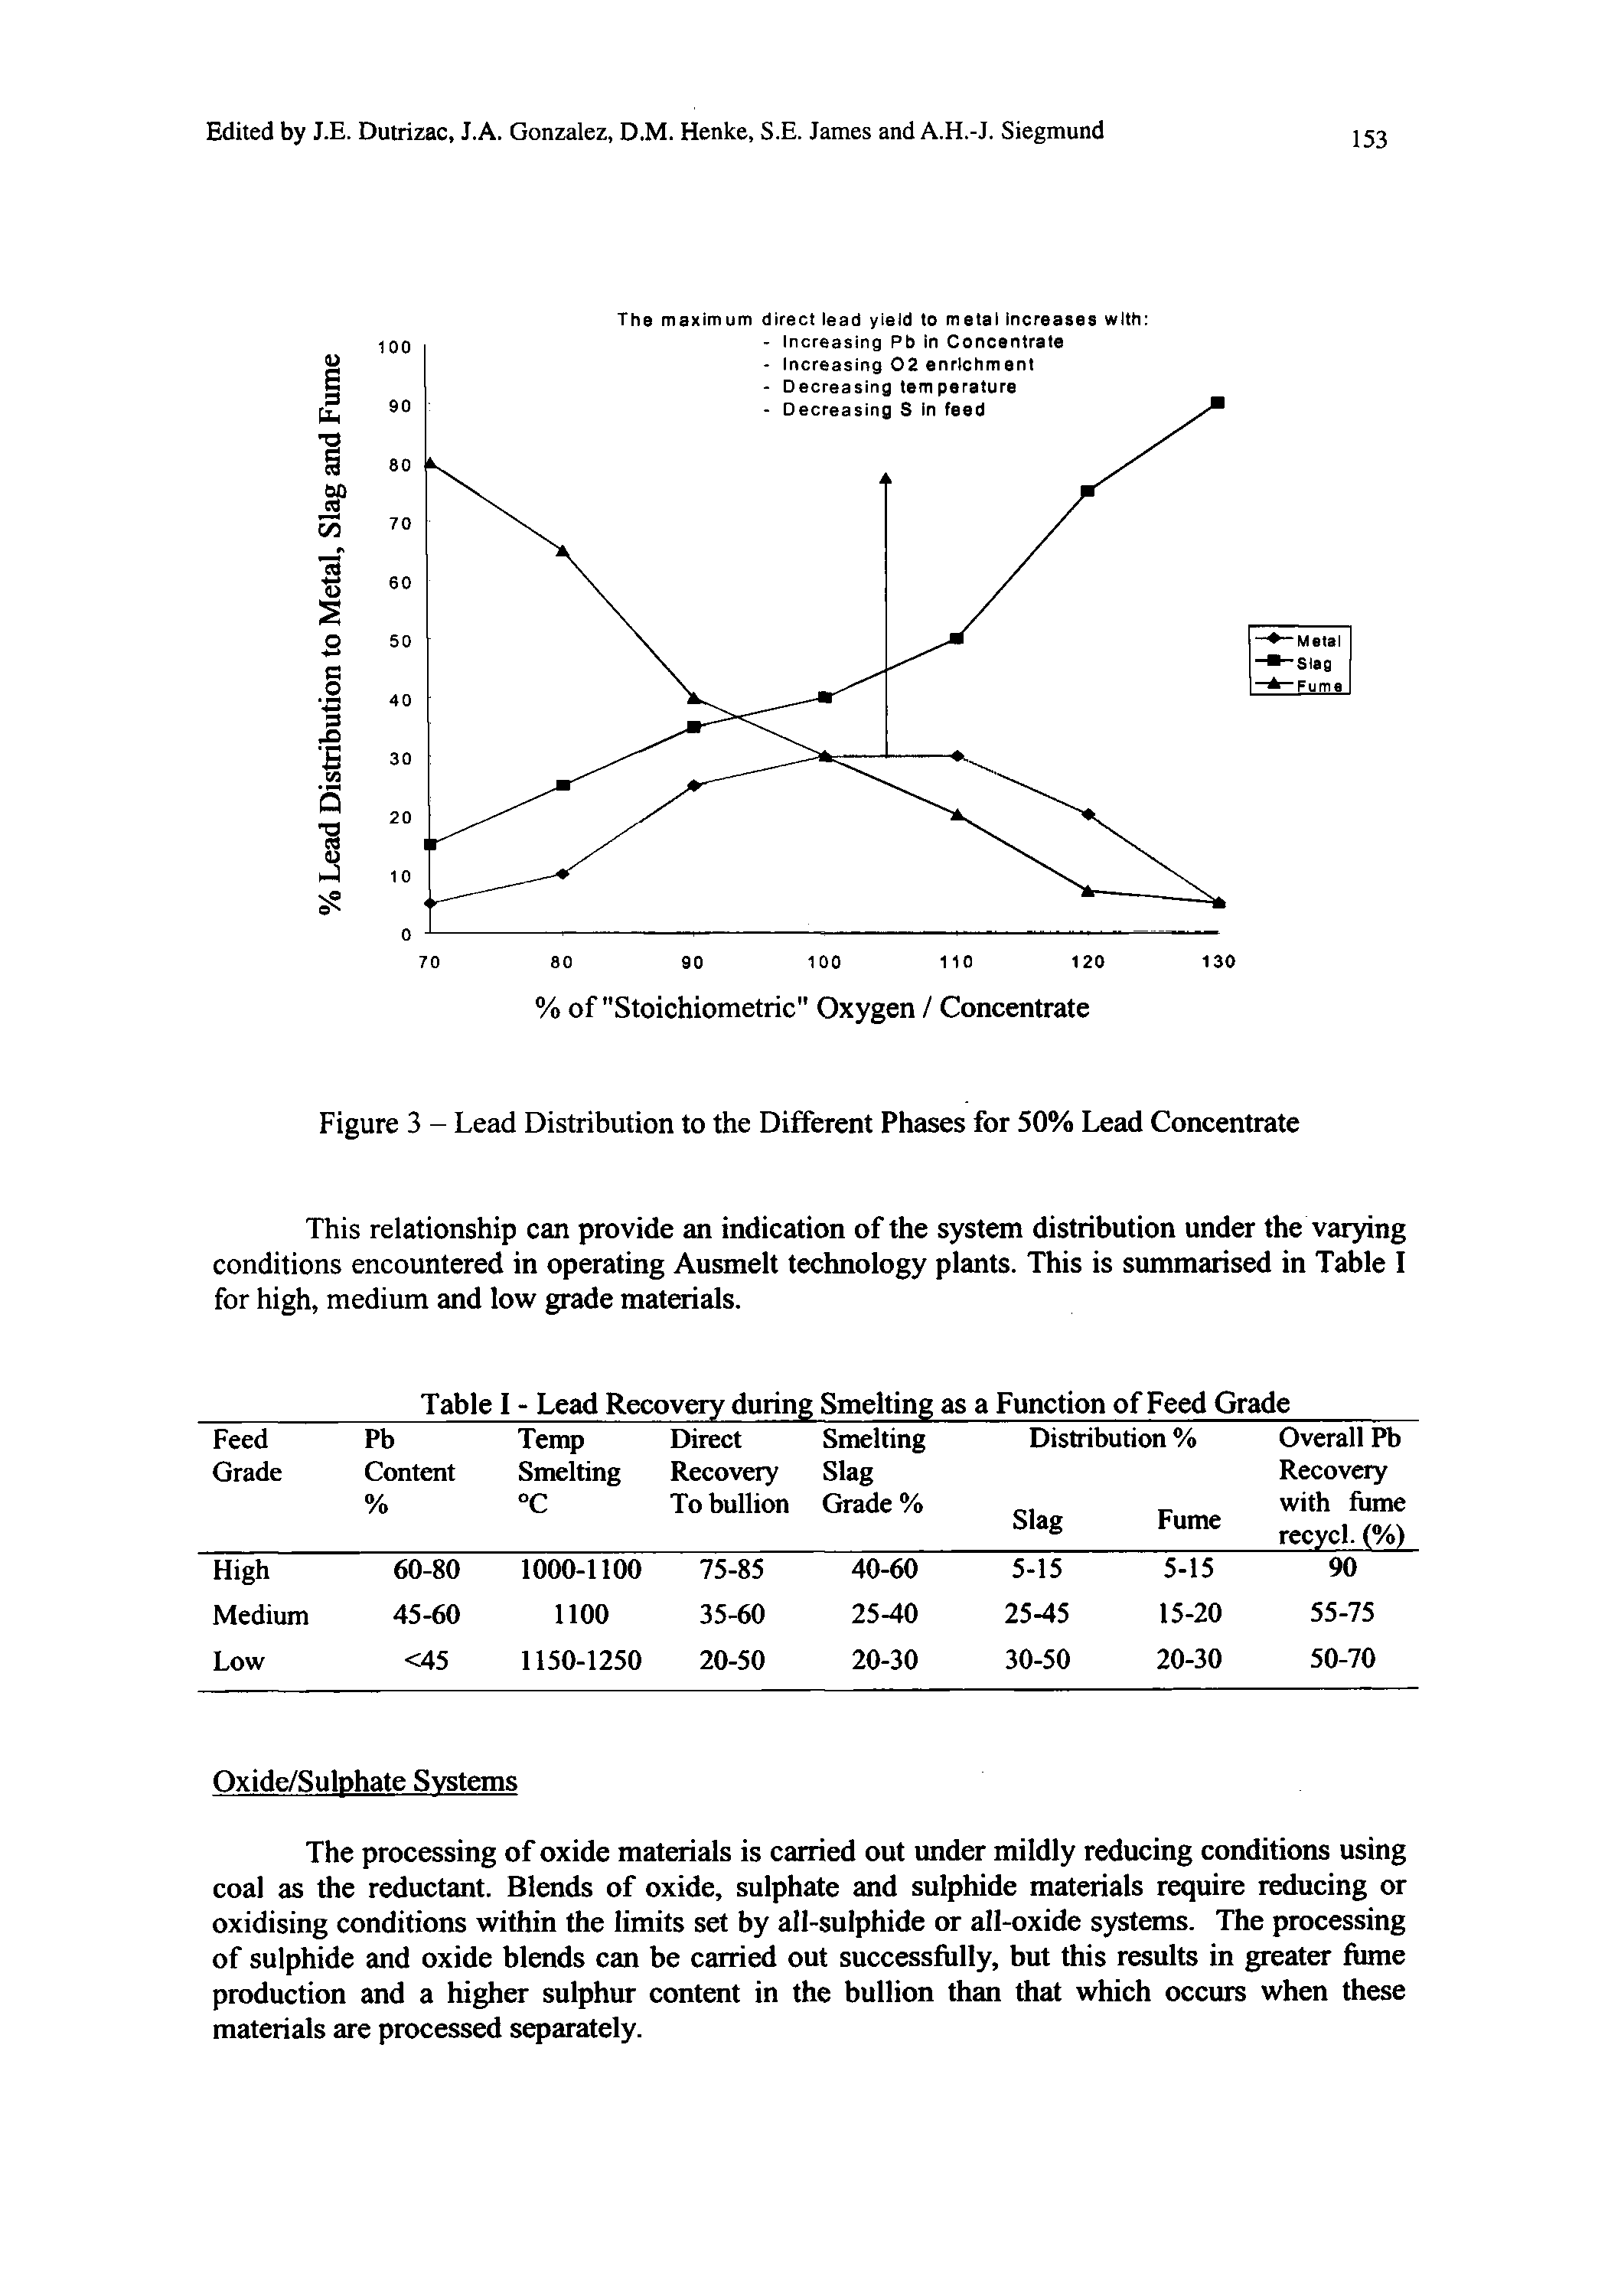 Table I - Lead Recovery during Smelting as a Function of Feed Grade...